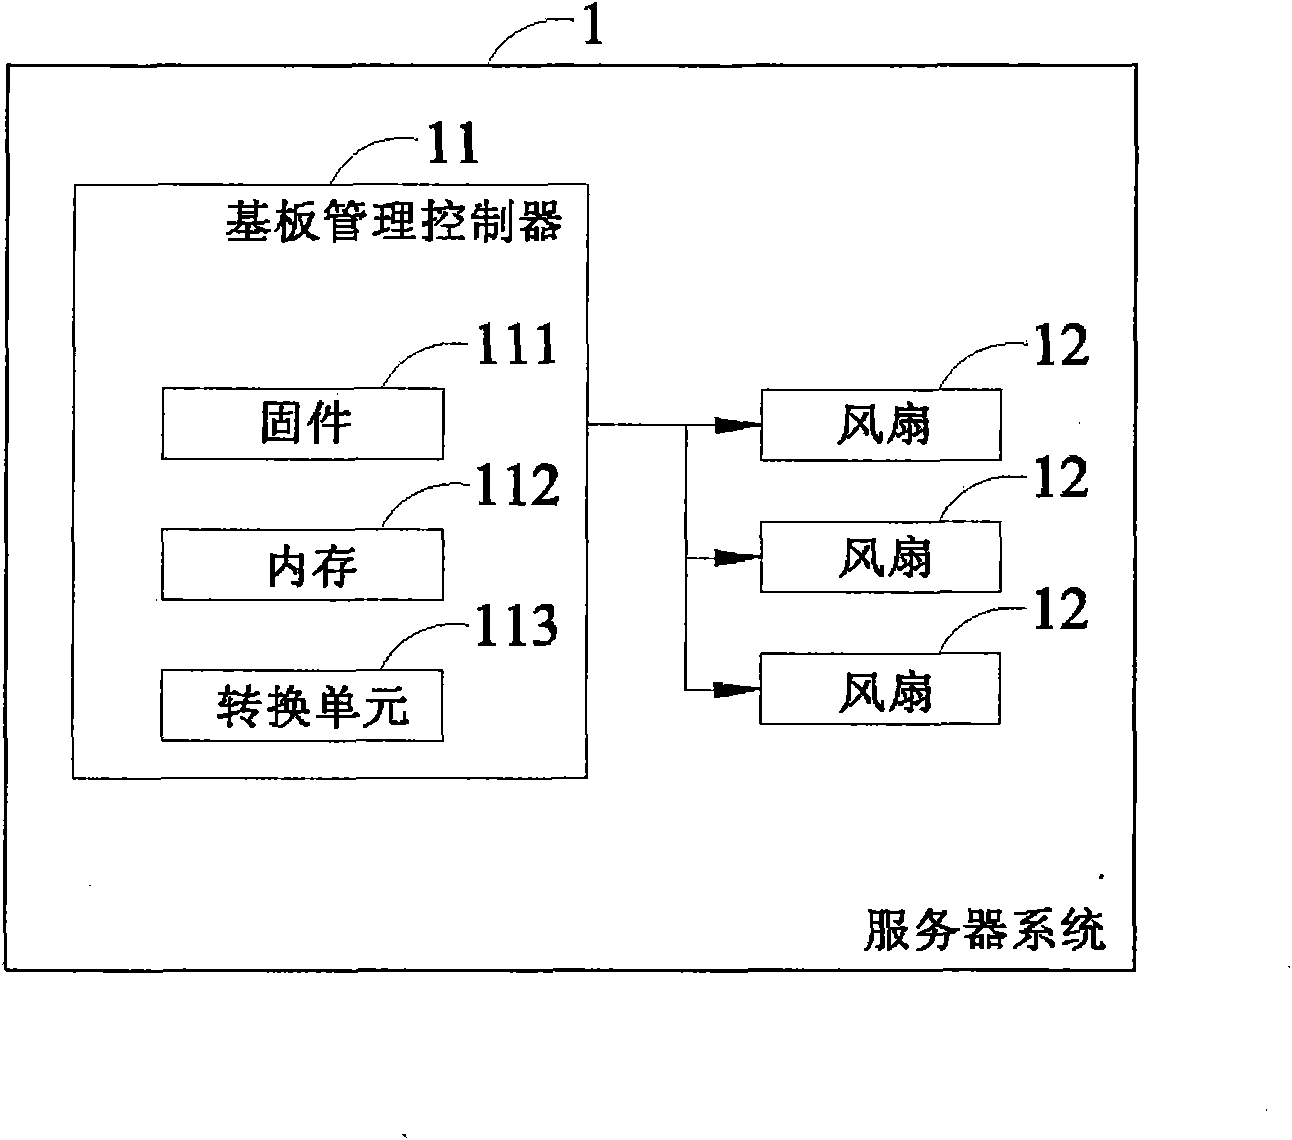 Method for controlling rotating speed of fan by utilizing baseboard management controller